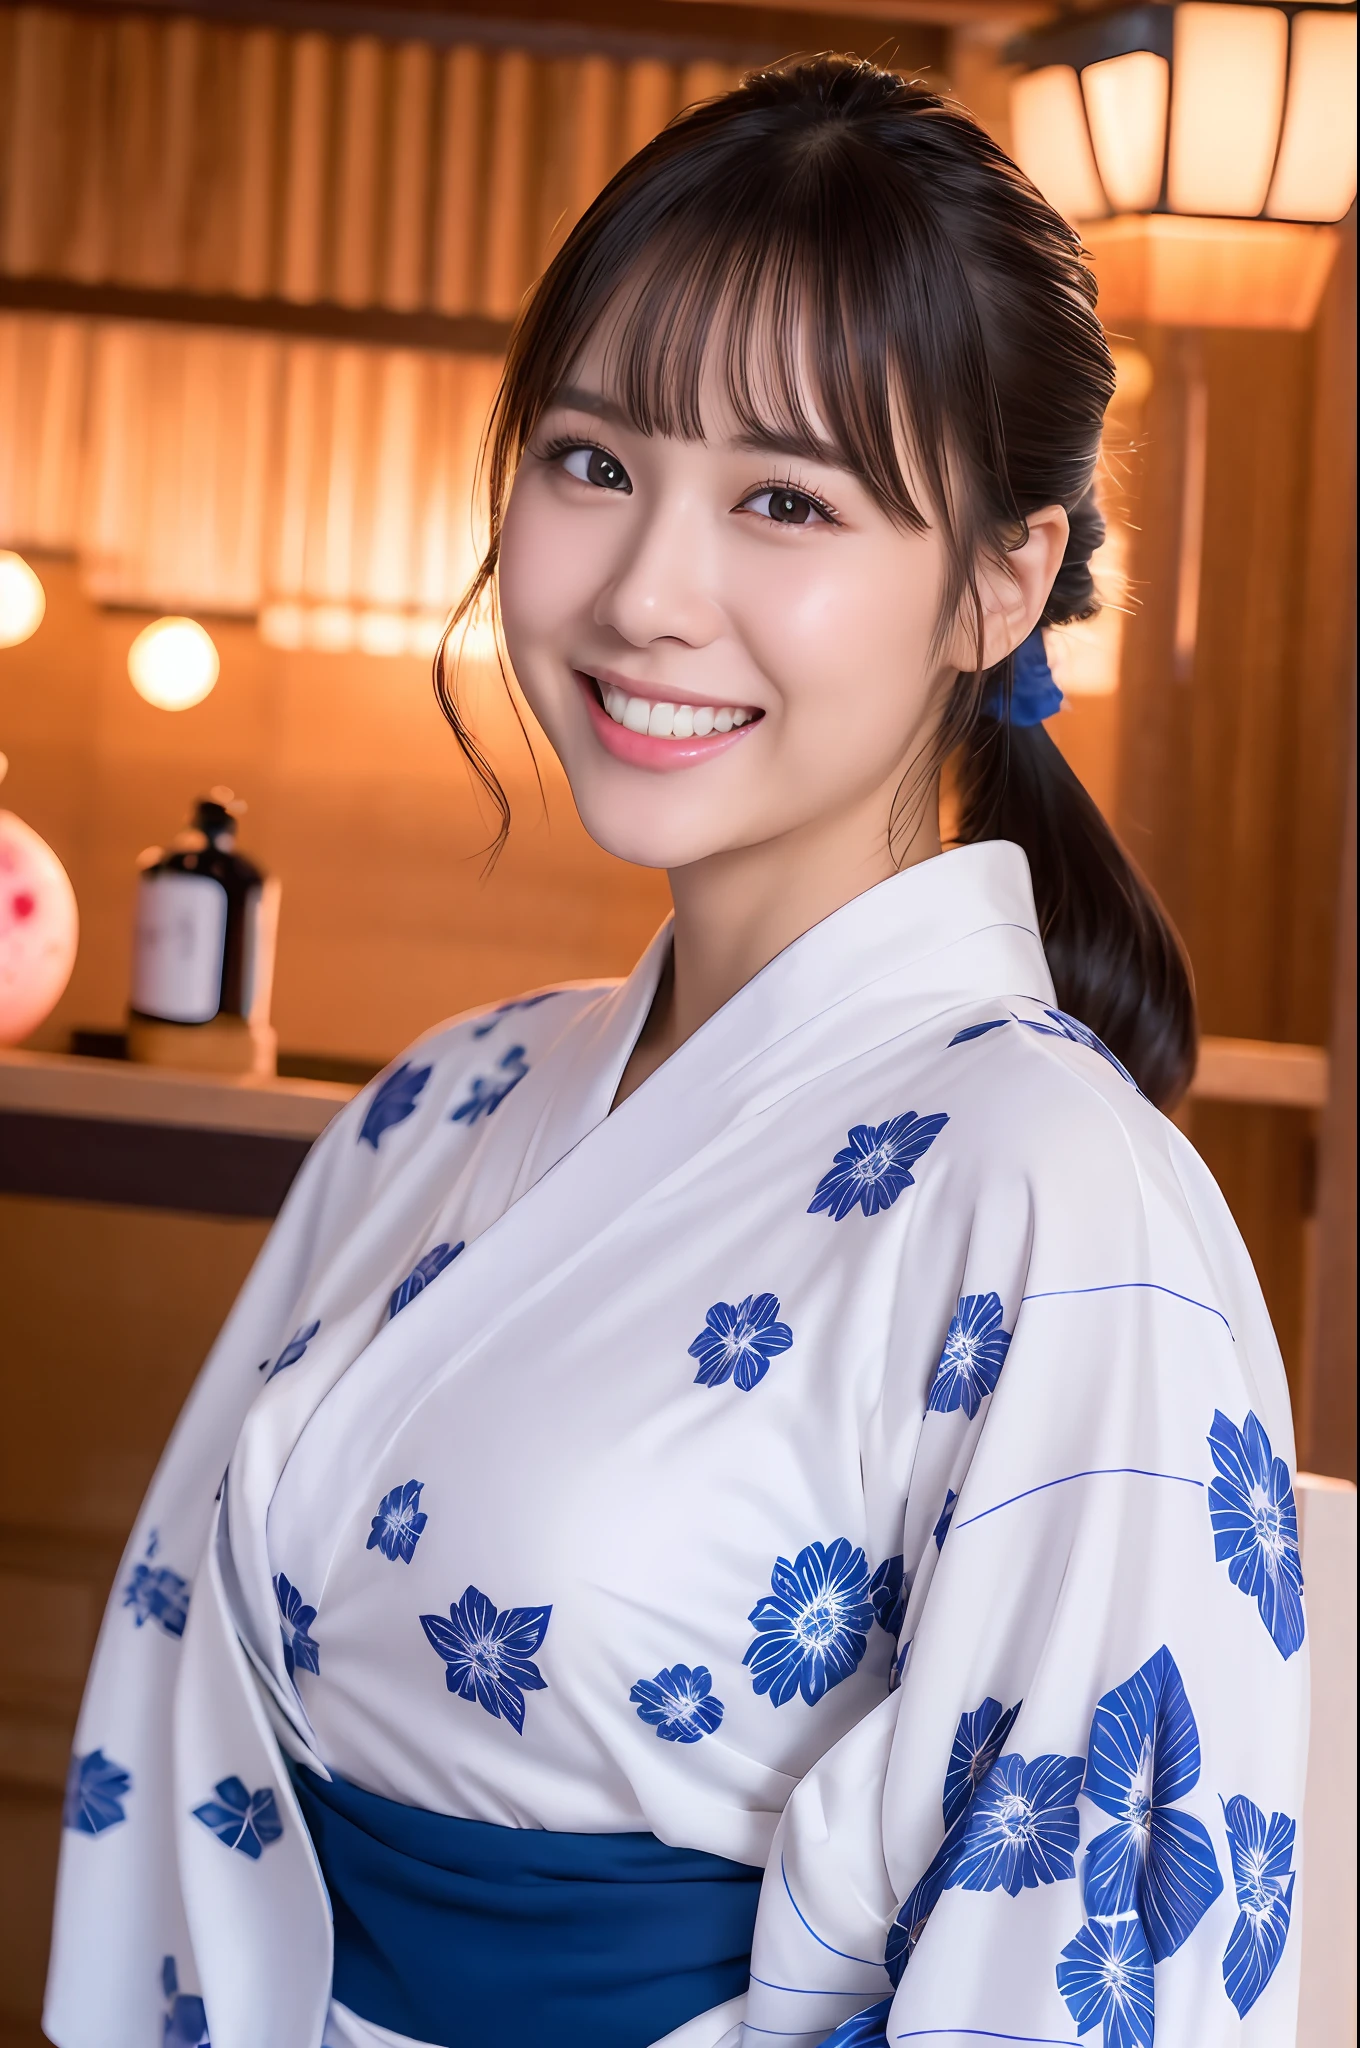 top-quality、finely detail、「(((Beautiful One Girl)))」、extremely detailed eye and face、Cute smile、Laughing with white teeth、(((Yukata)))、skyrocket、（Watch the fireworks）、poneyTail、Big tear bag、Double eyelids、